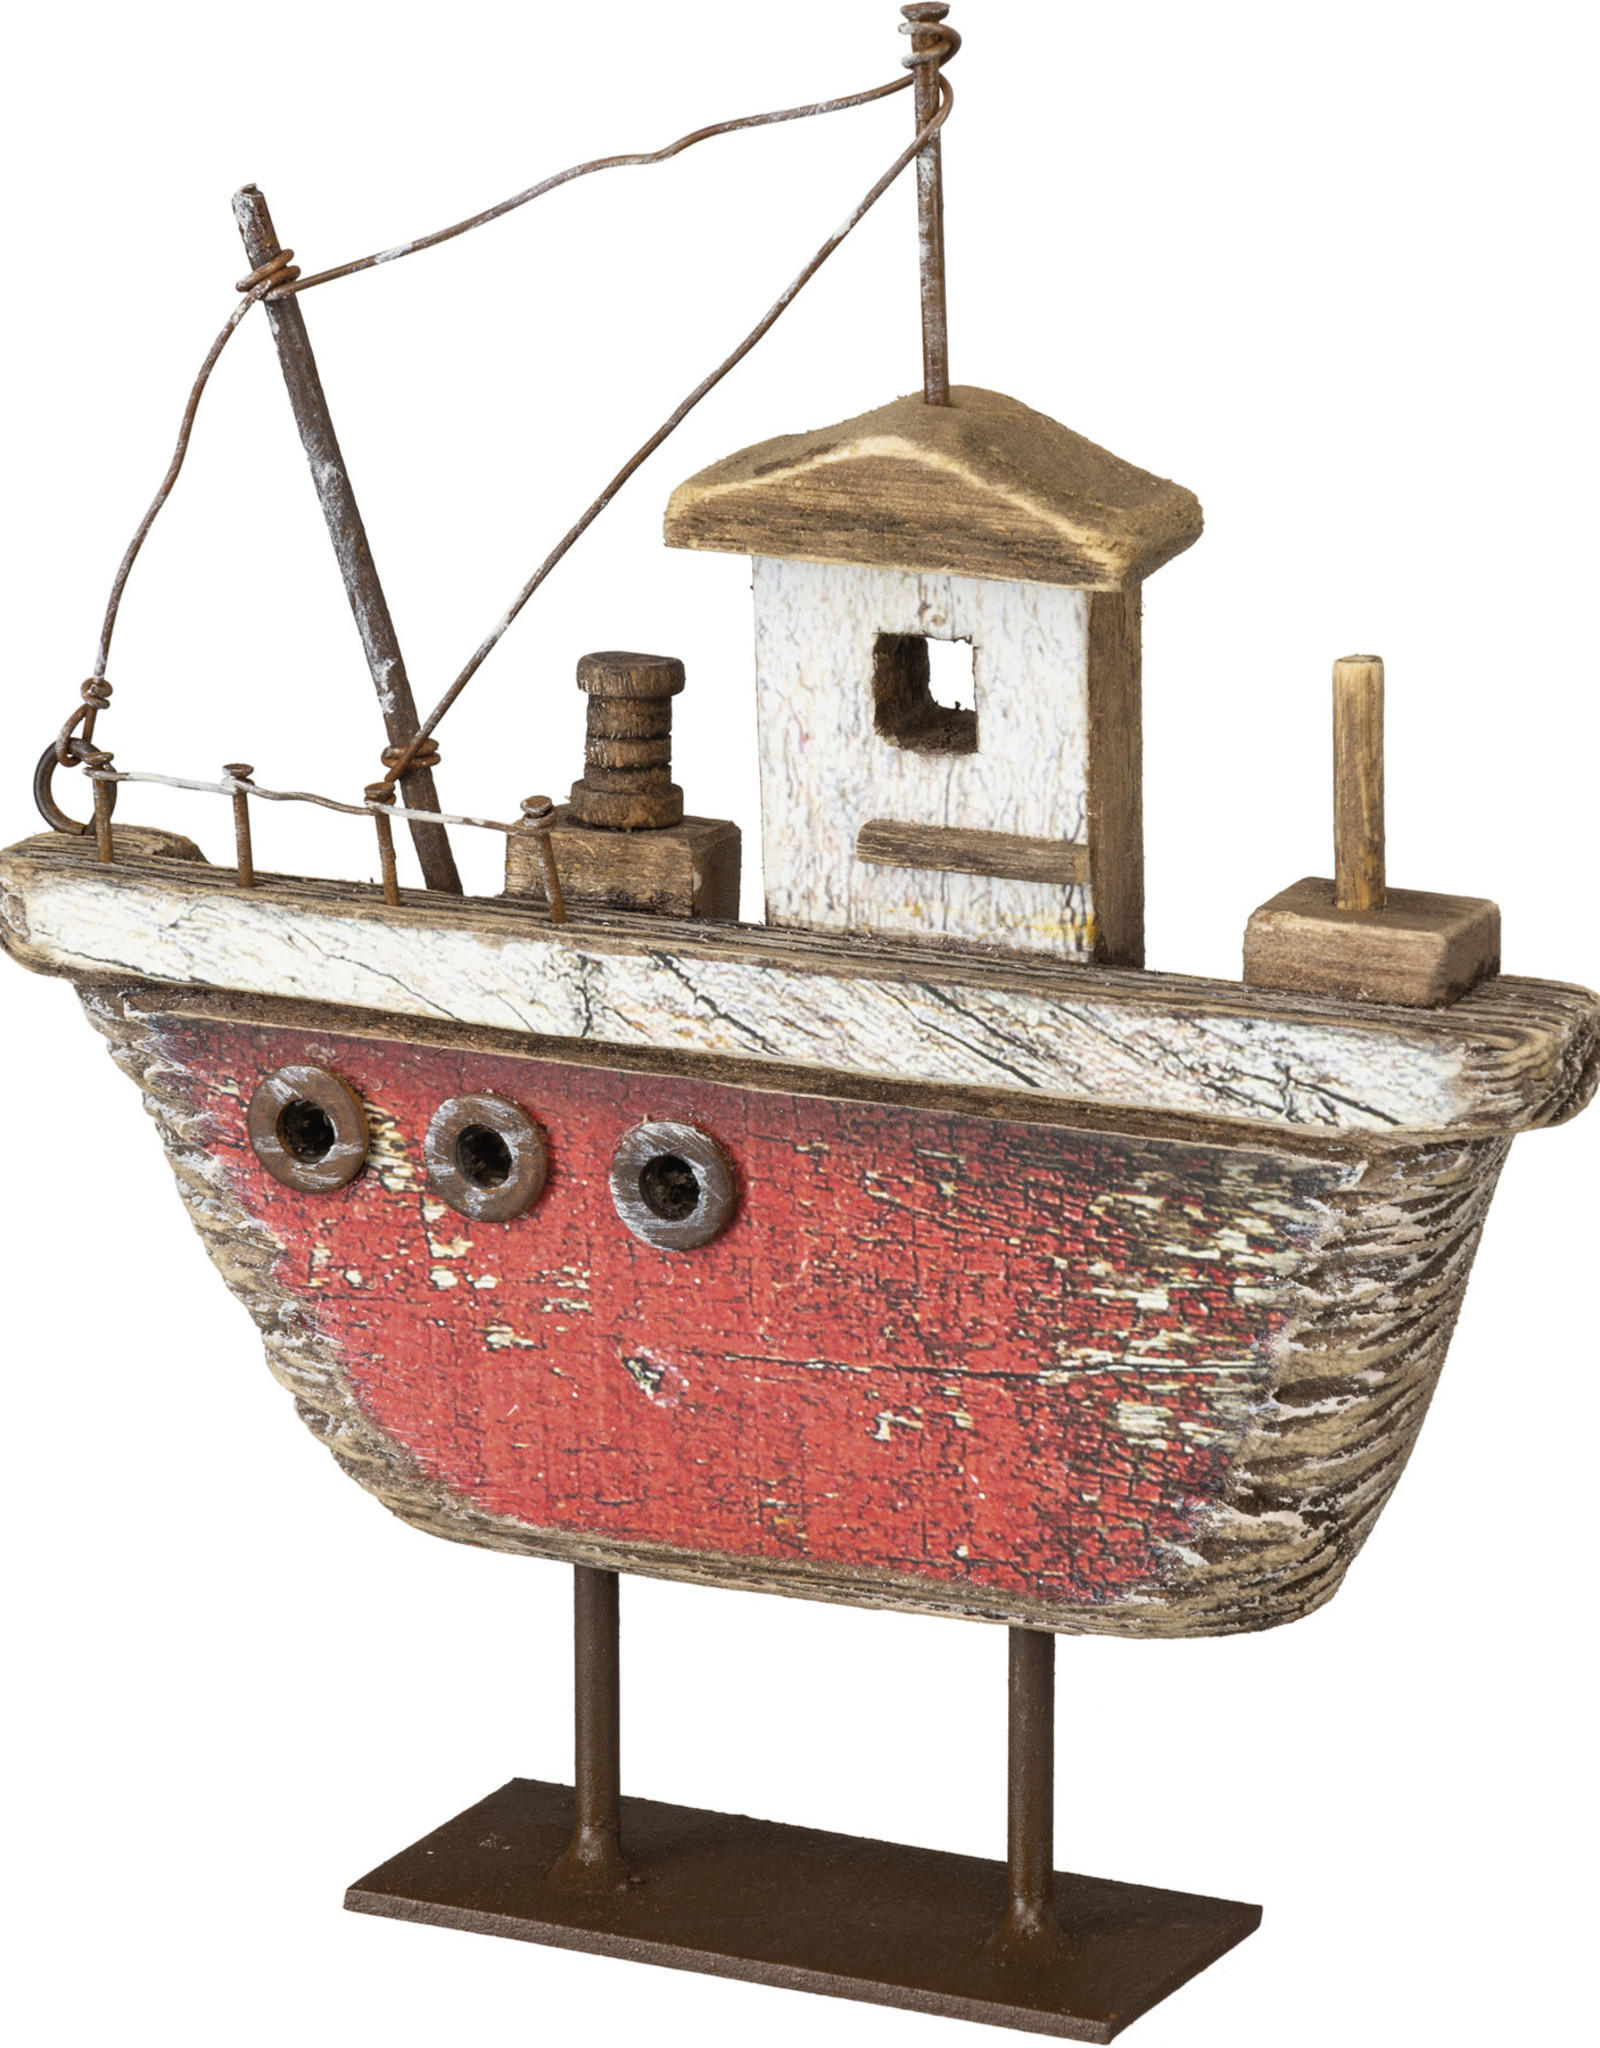 Sitter - Fishing Boat Red